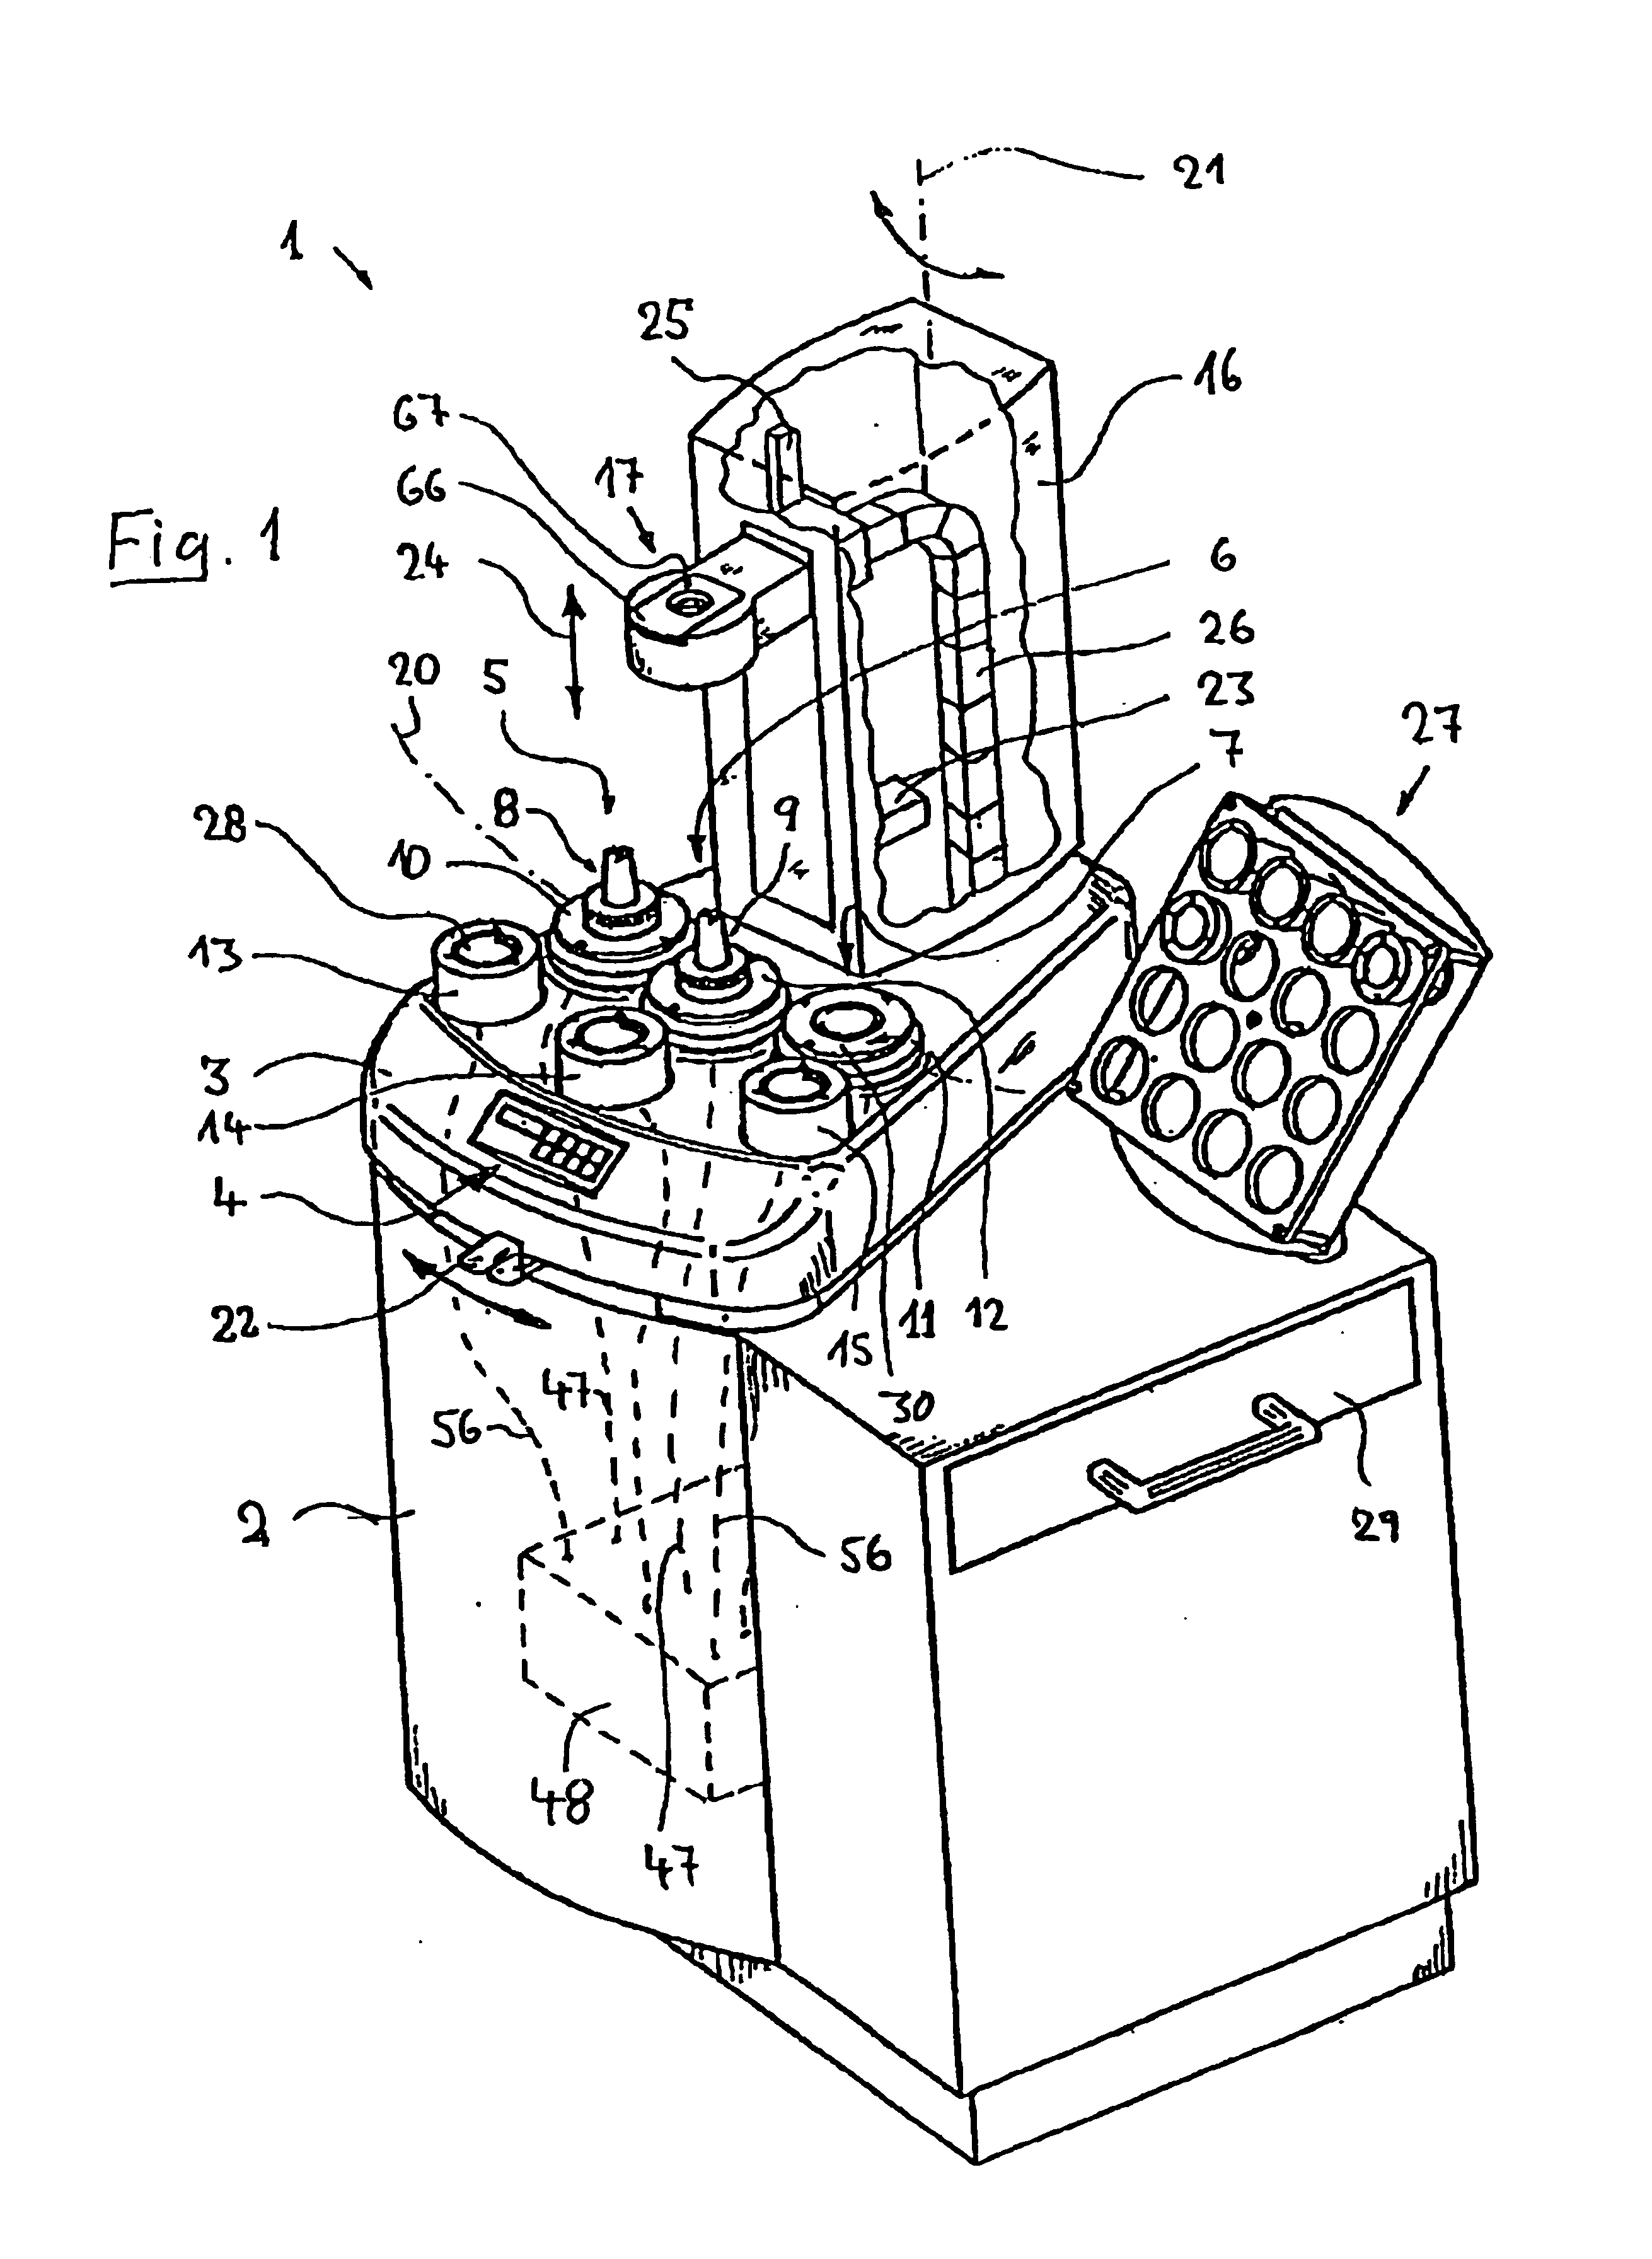 Method and apparatus for the thermal clamping and releasing of tools